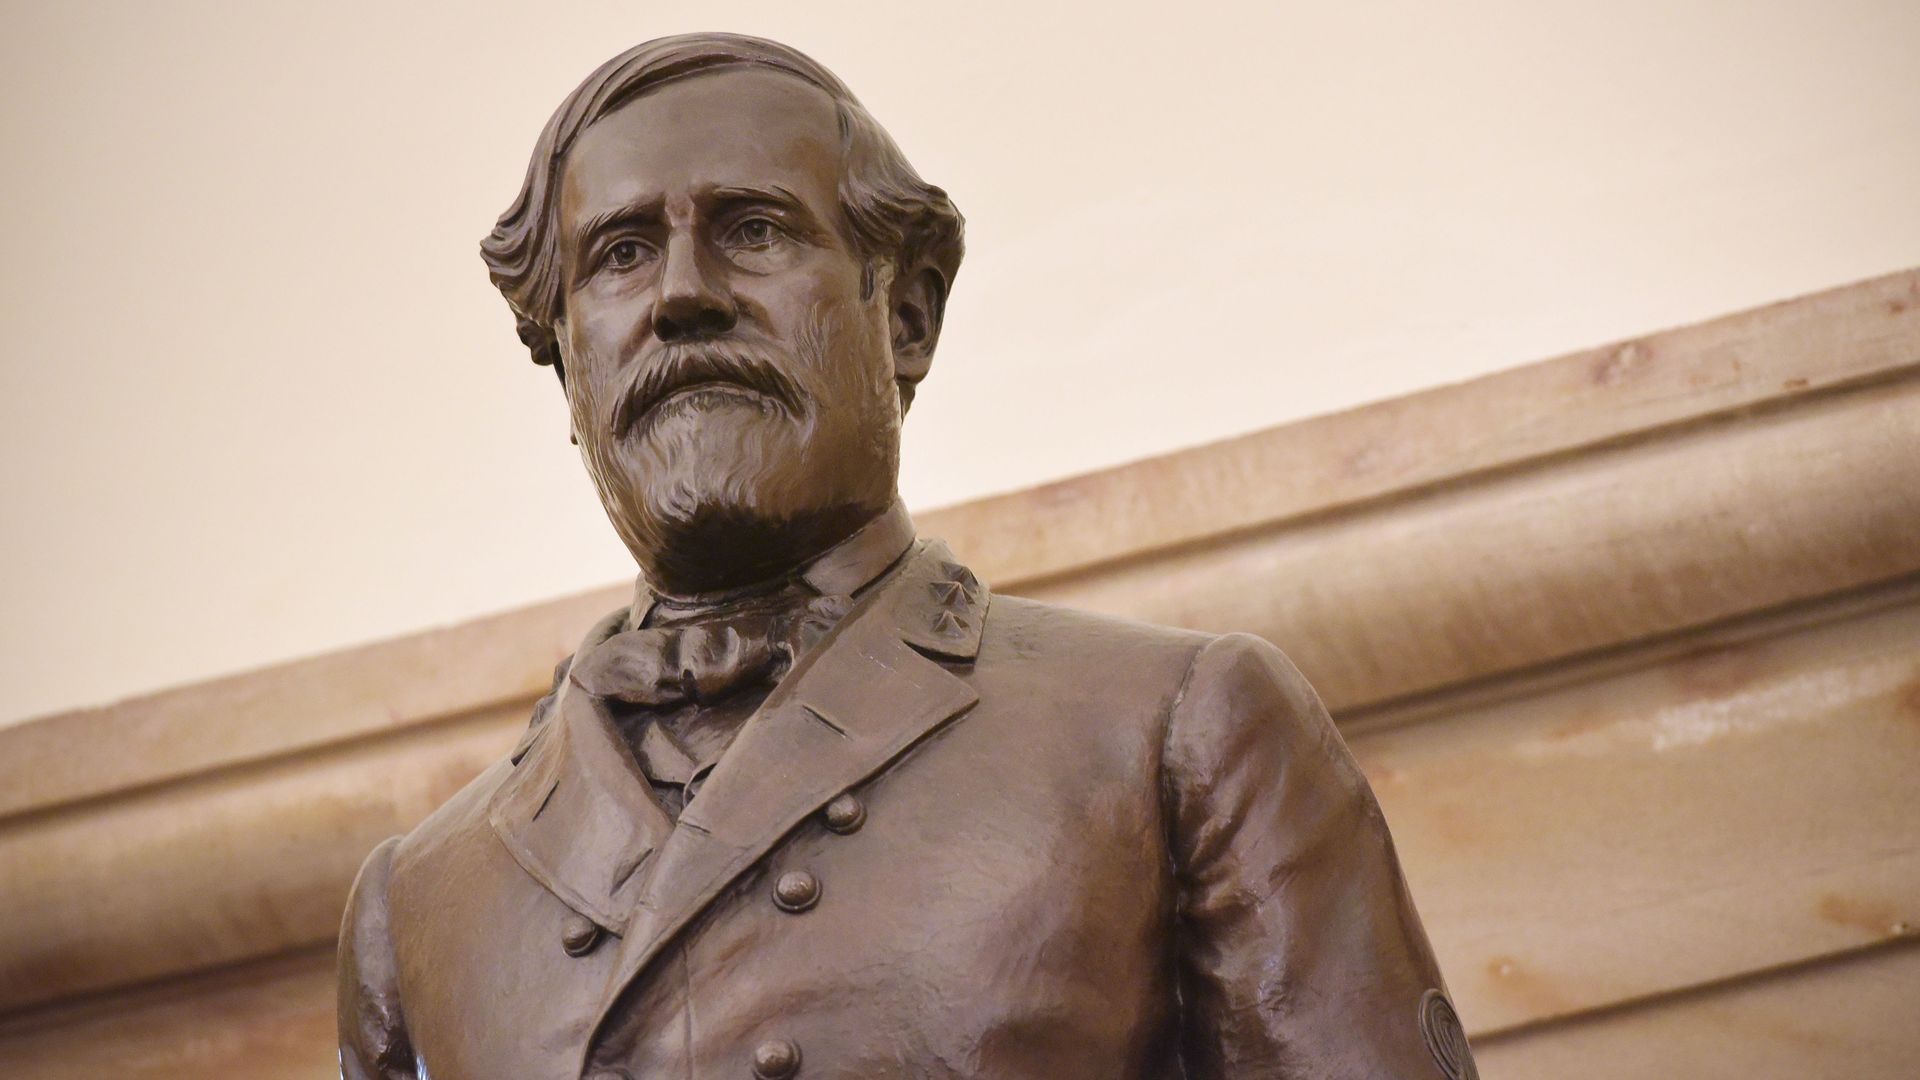 The statue of Robert E. Lee